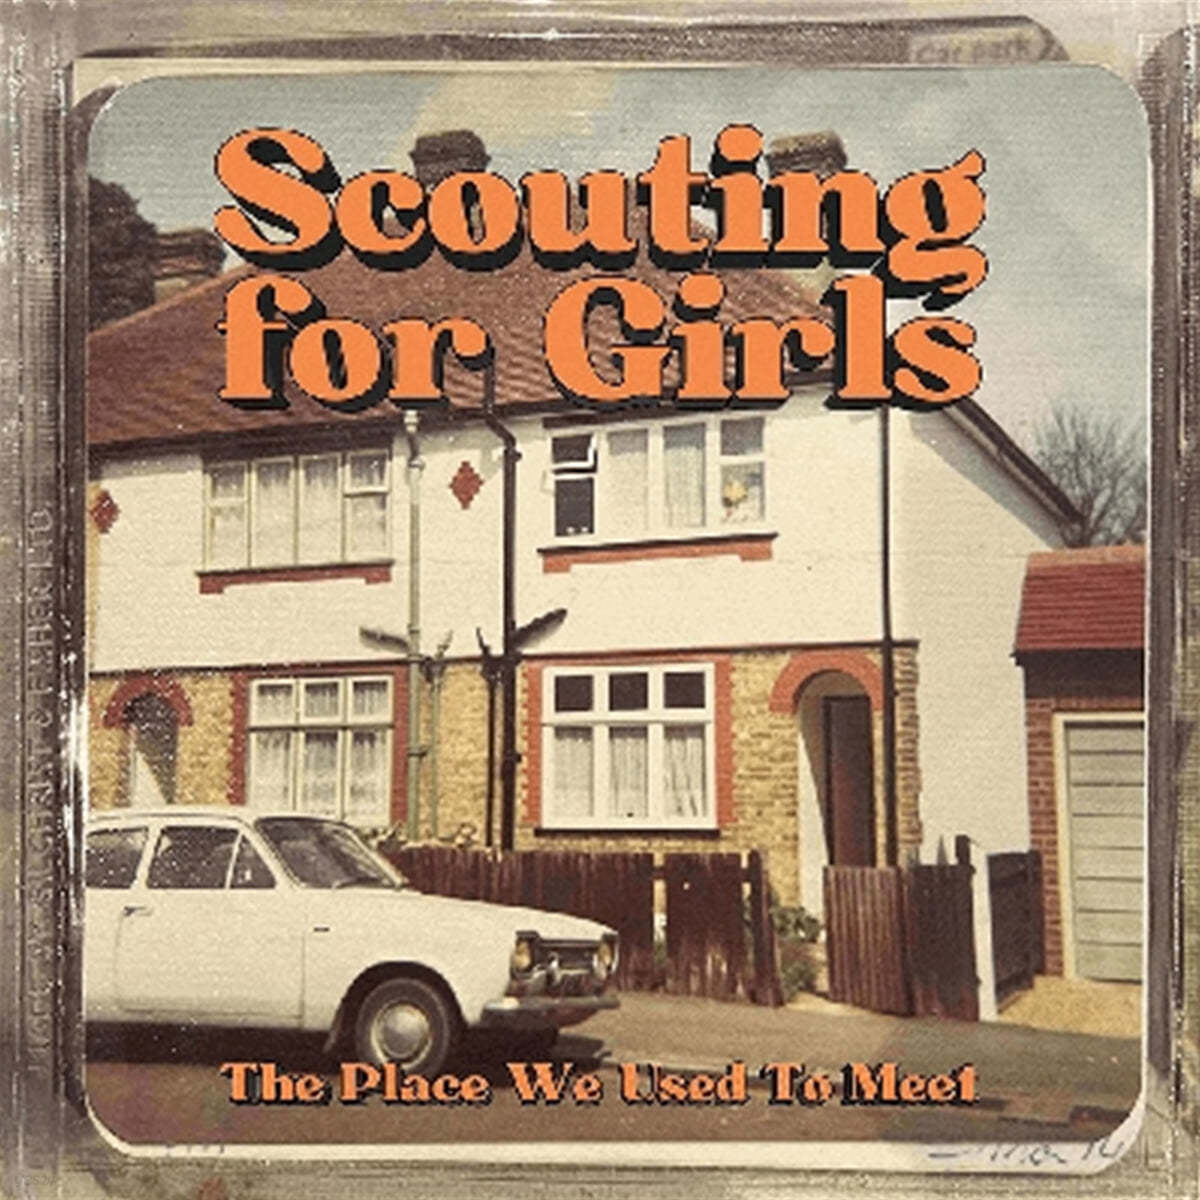 Scouting For Girls (스카우팅 포 걸스) - The Place We Used to Meet 